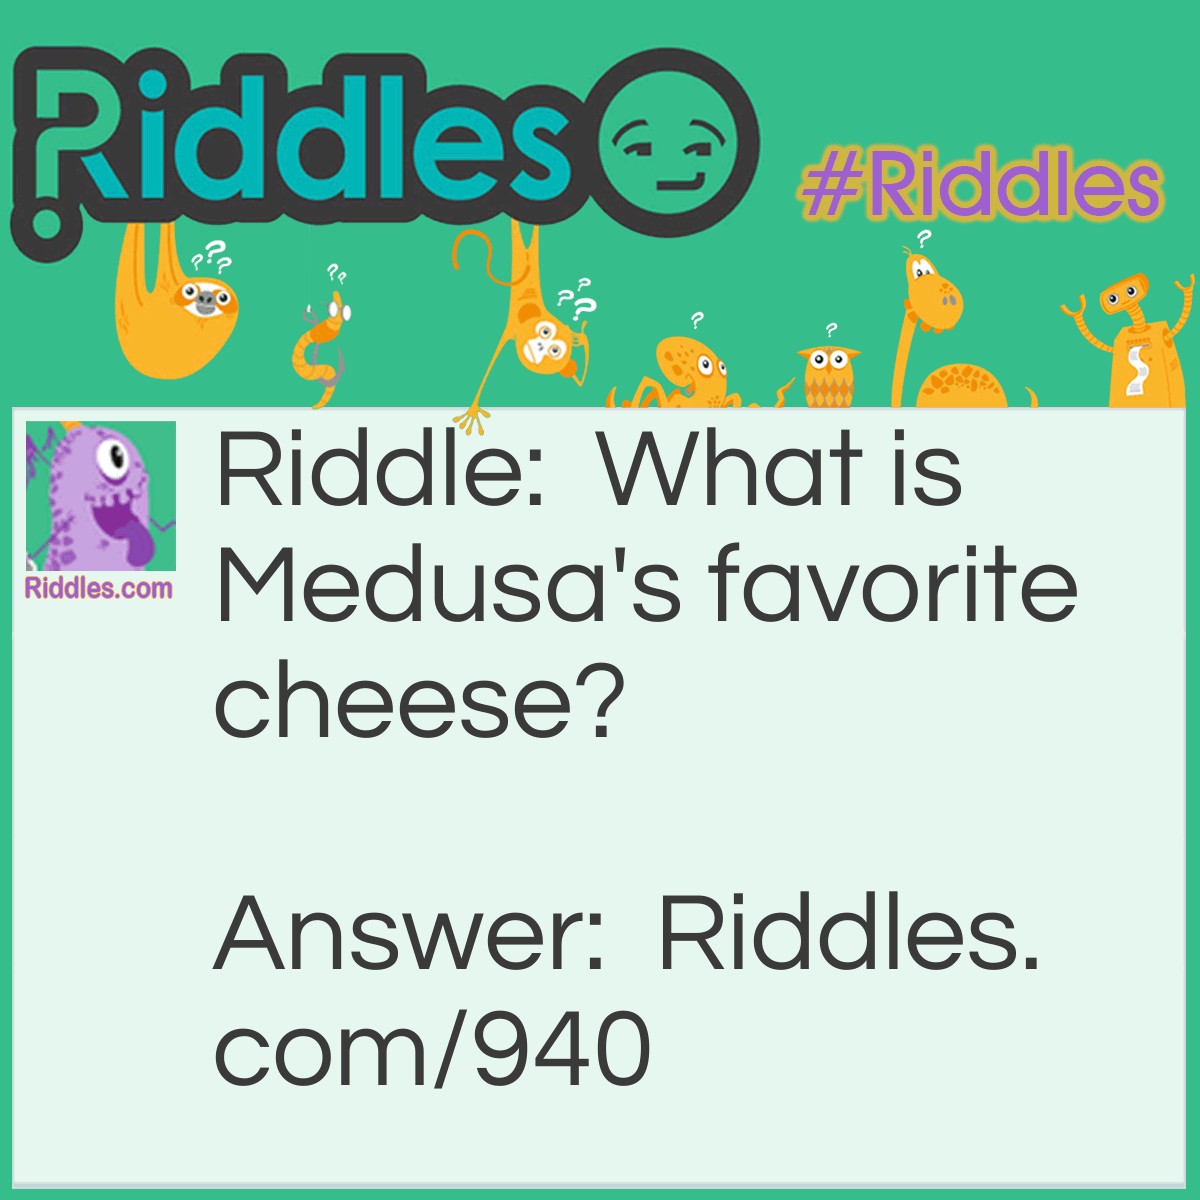 Riddle: What is Medusa's favorite cheese? Answer: Gorgonzola.